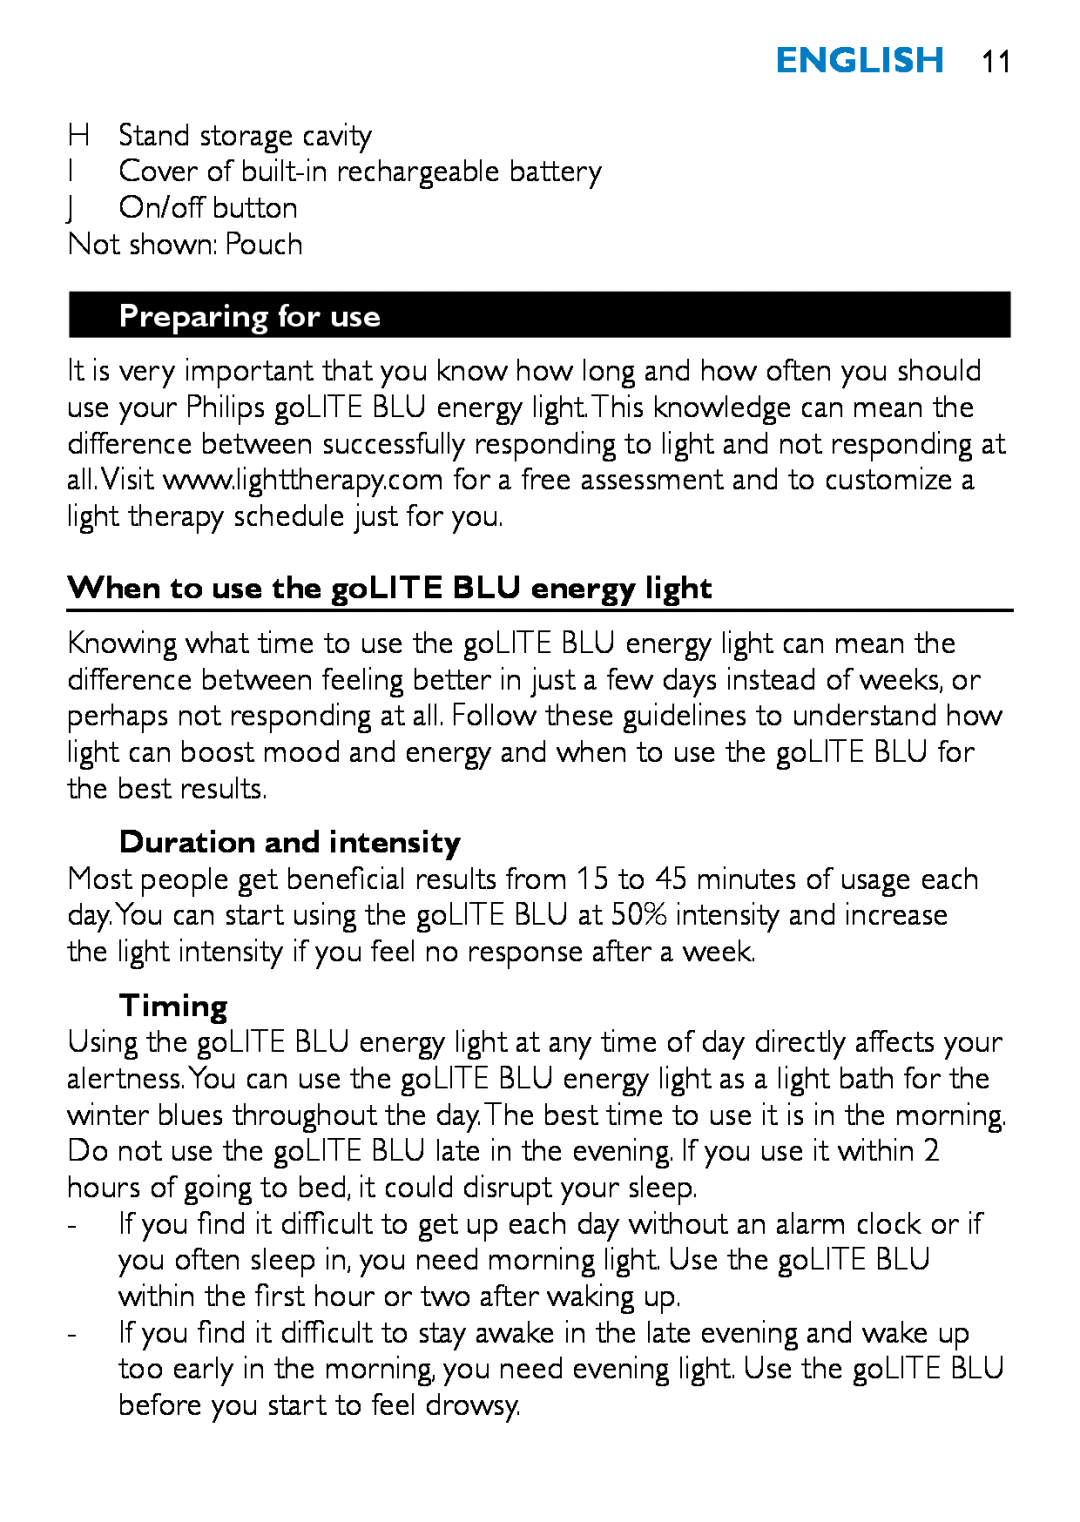 Philips HF3332, HF3331 Preparing for use, English, When to use the goLITE BLU energy light, Duration and intensity, Timing 